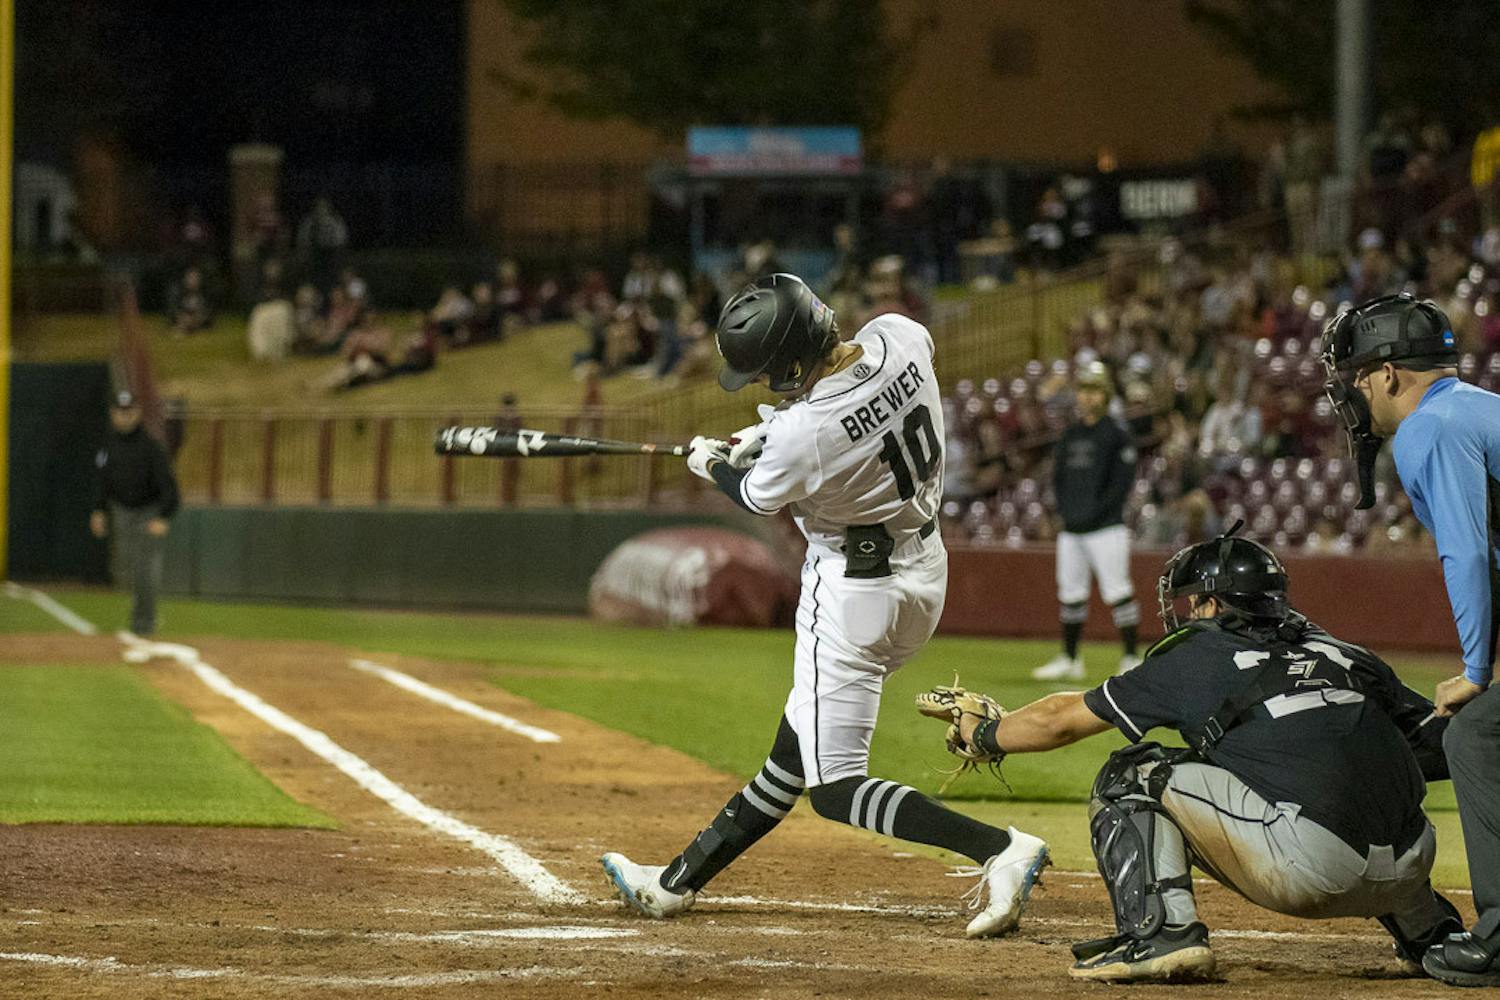 Senior outfielder Dylan Brewer battles at the plate against USC Upstate's pitcher before launching a home run for the Gamecocks on April 11, 2023, at Founders Park. The Gamecocks beat the Spartans 7-2.